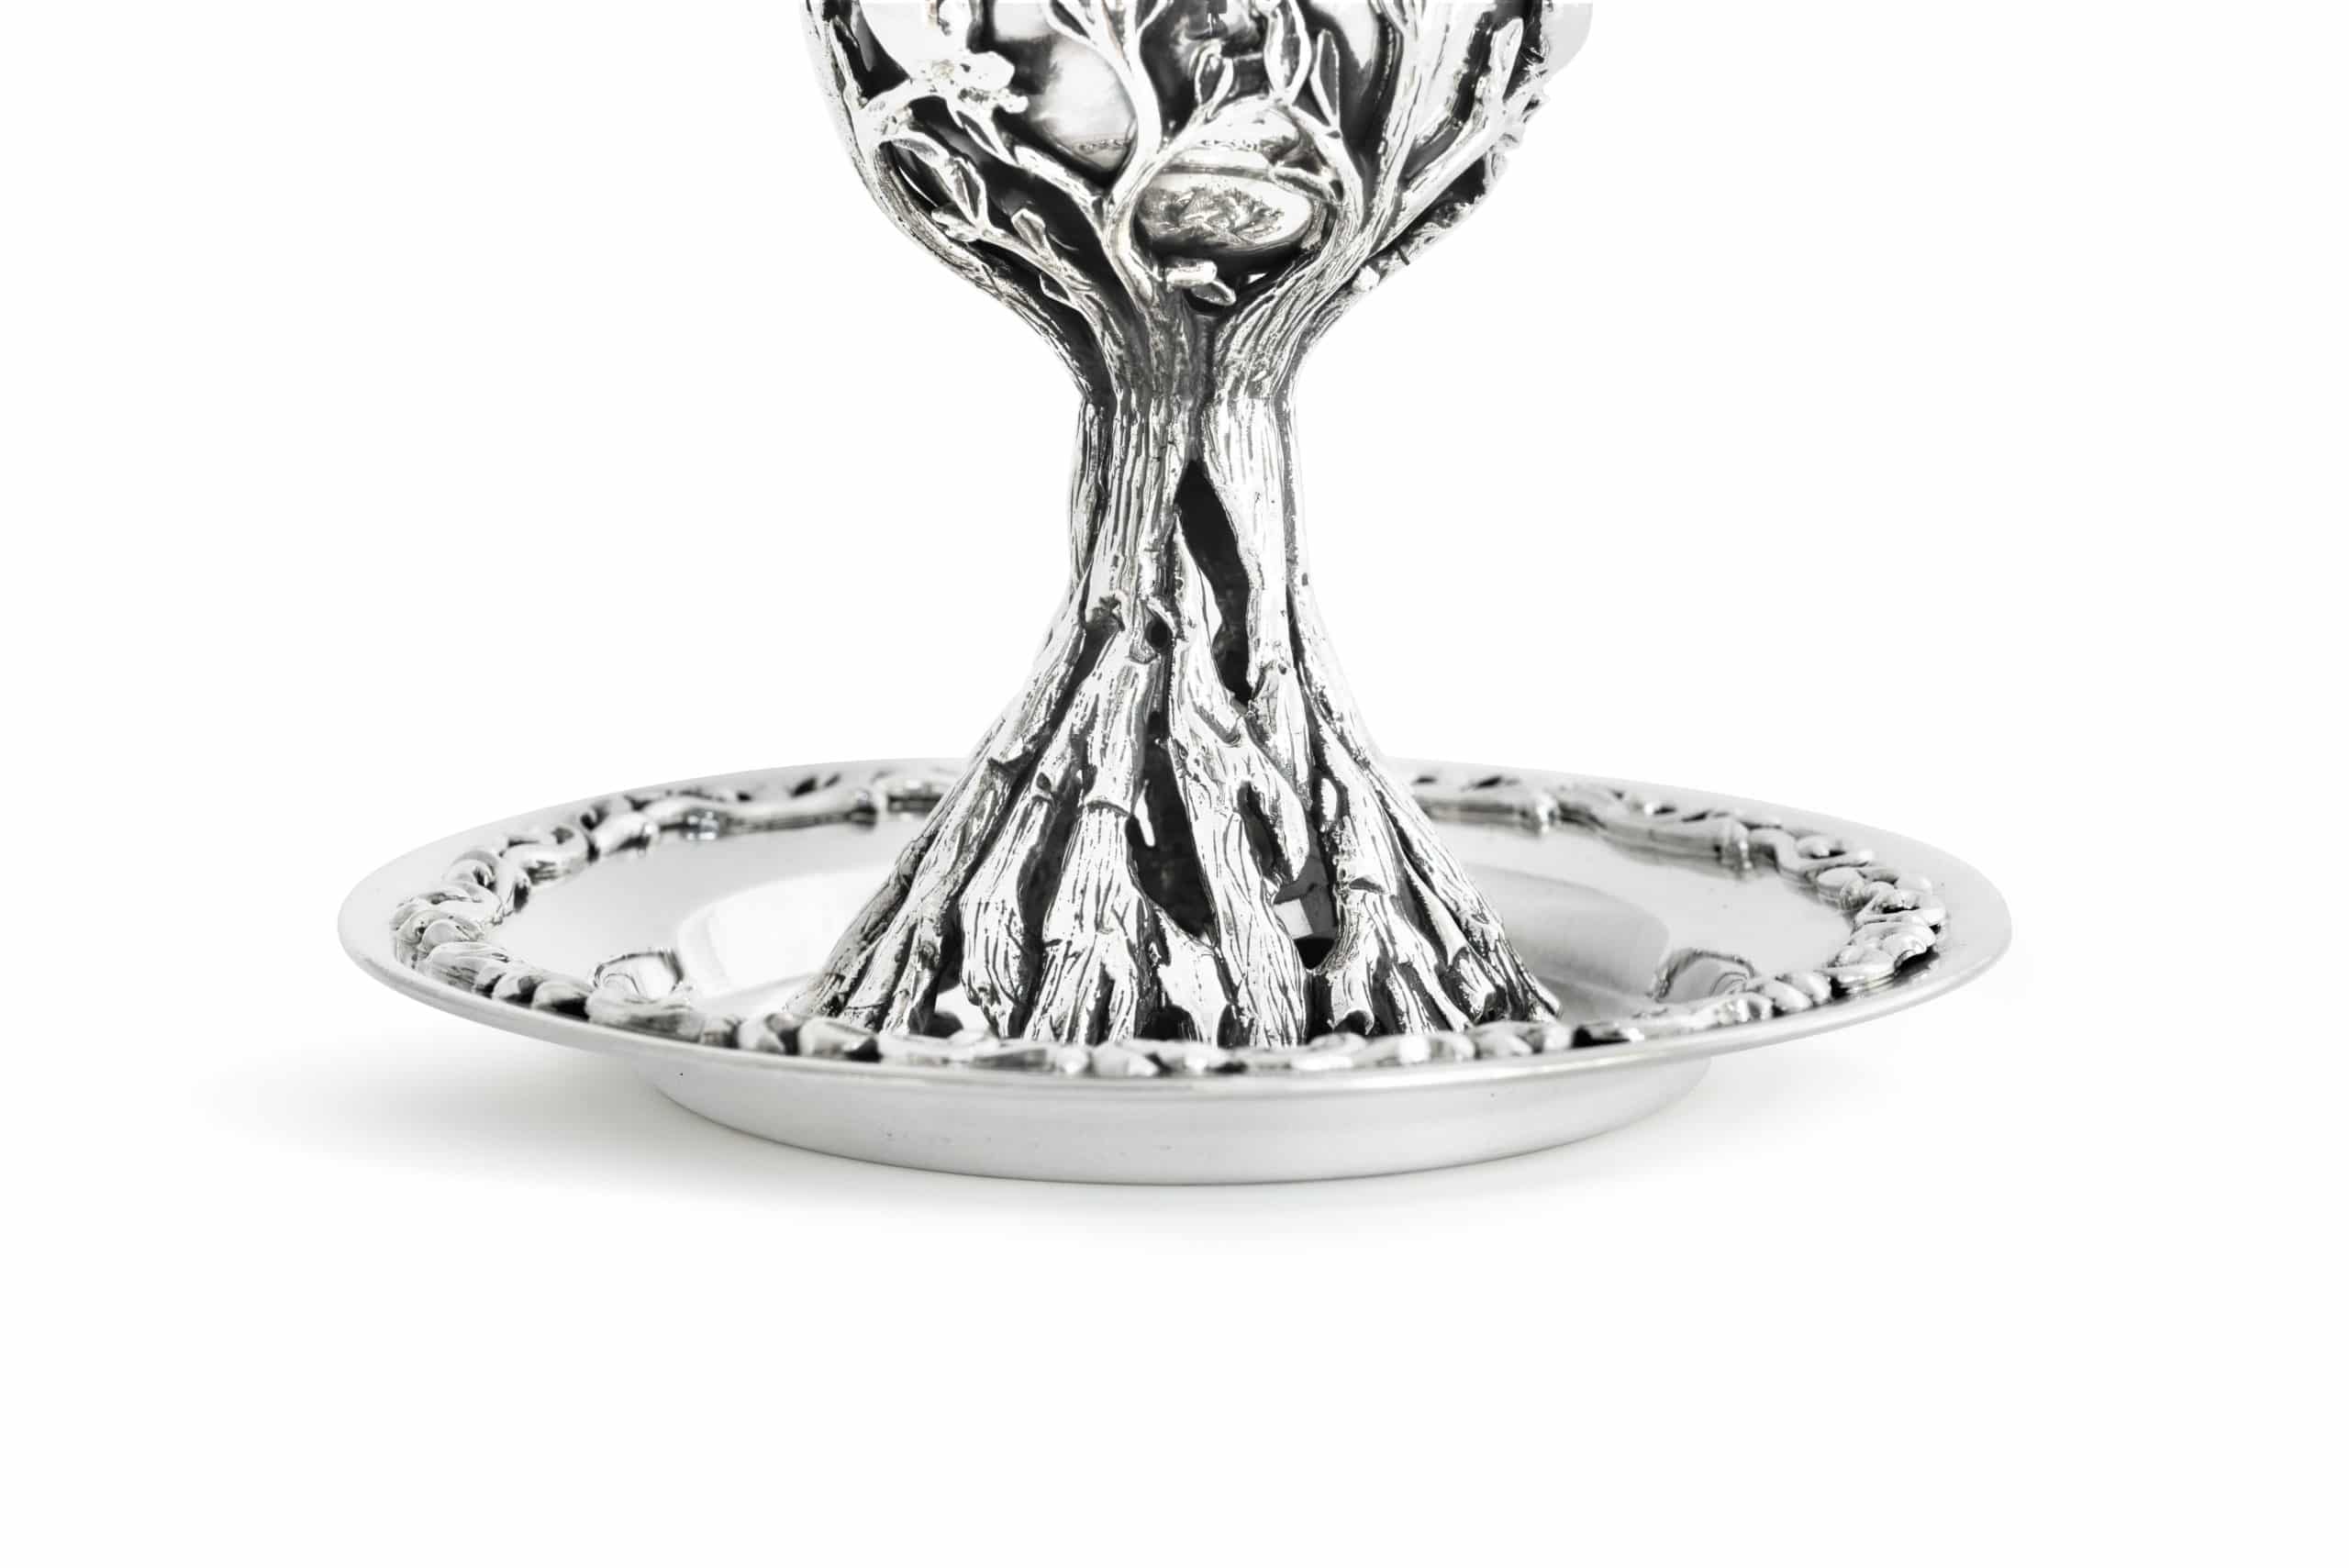 Kiddush Cup and Plate with Leaves Design